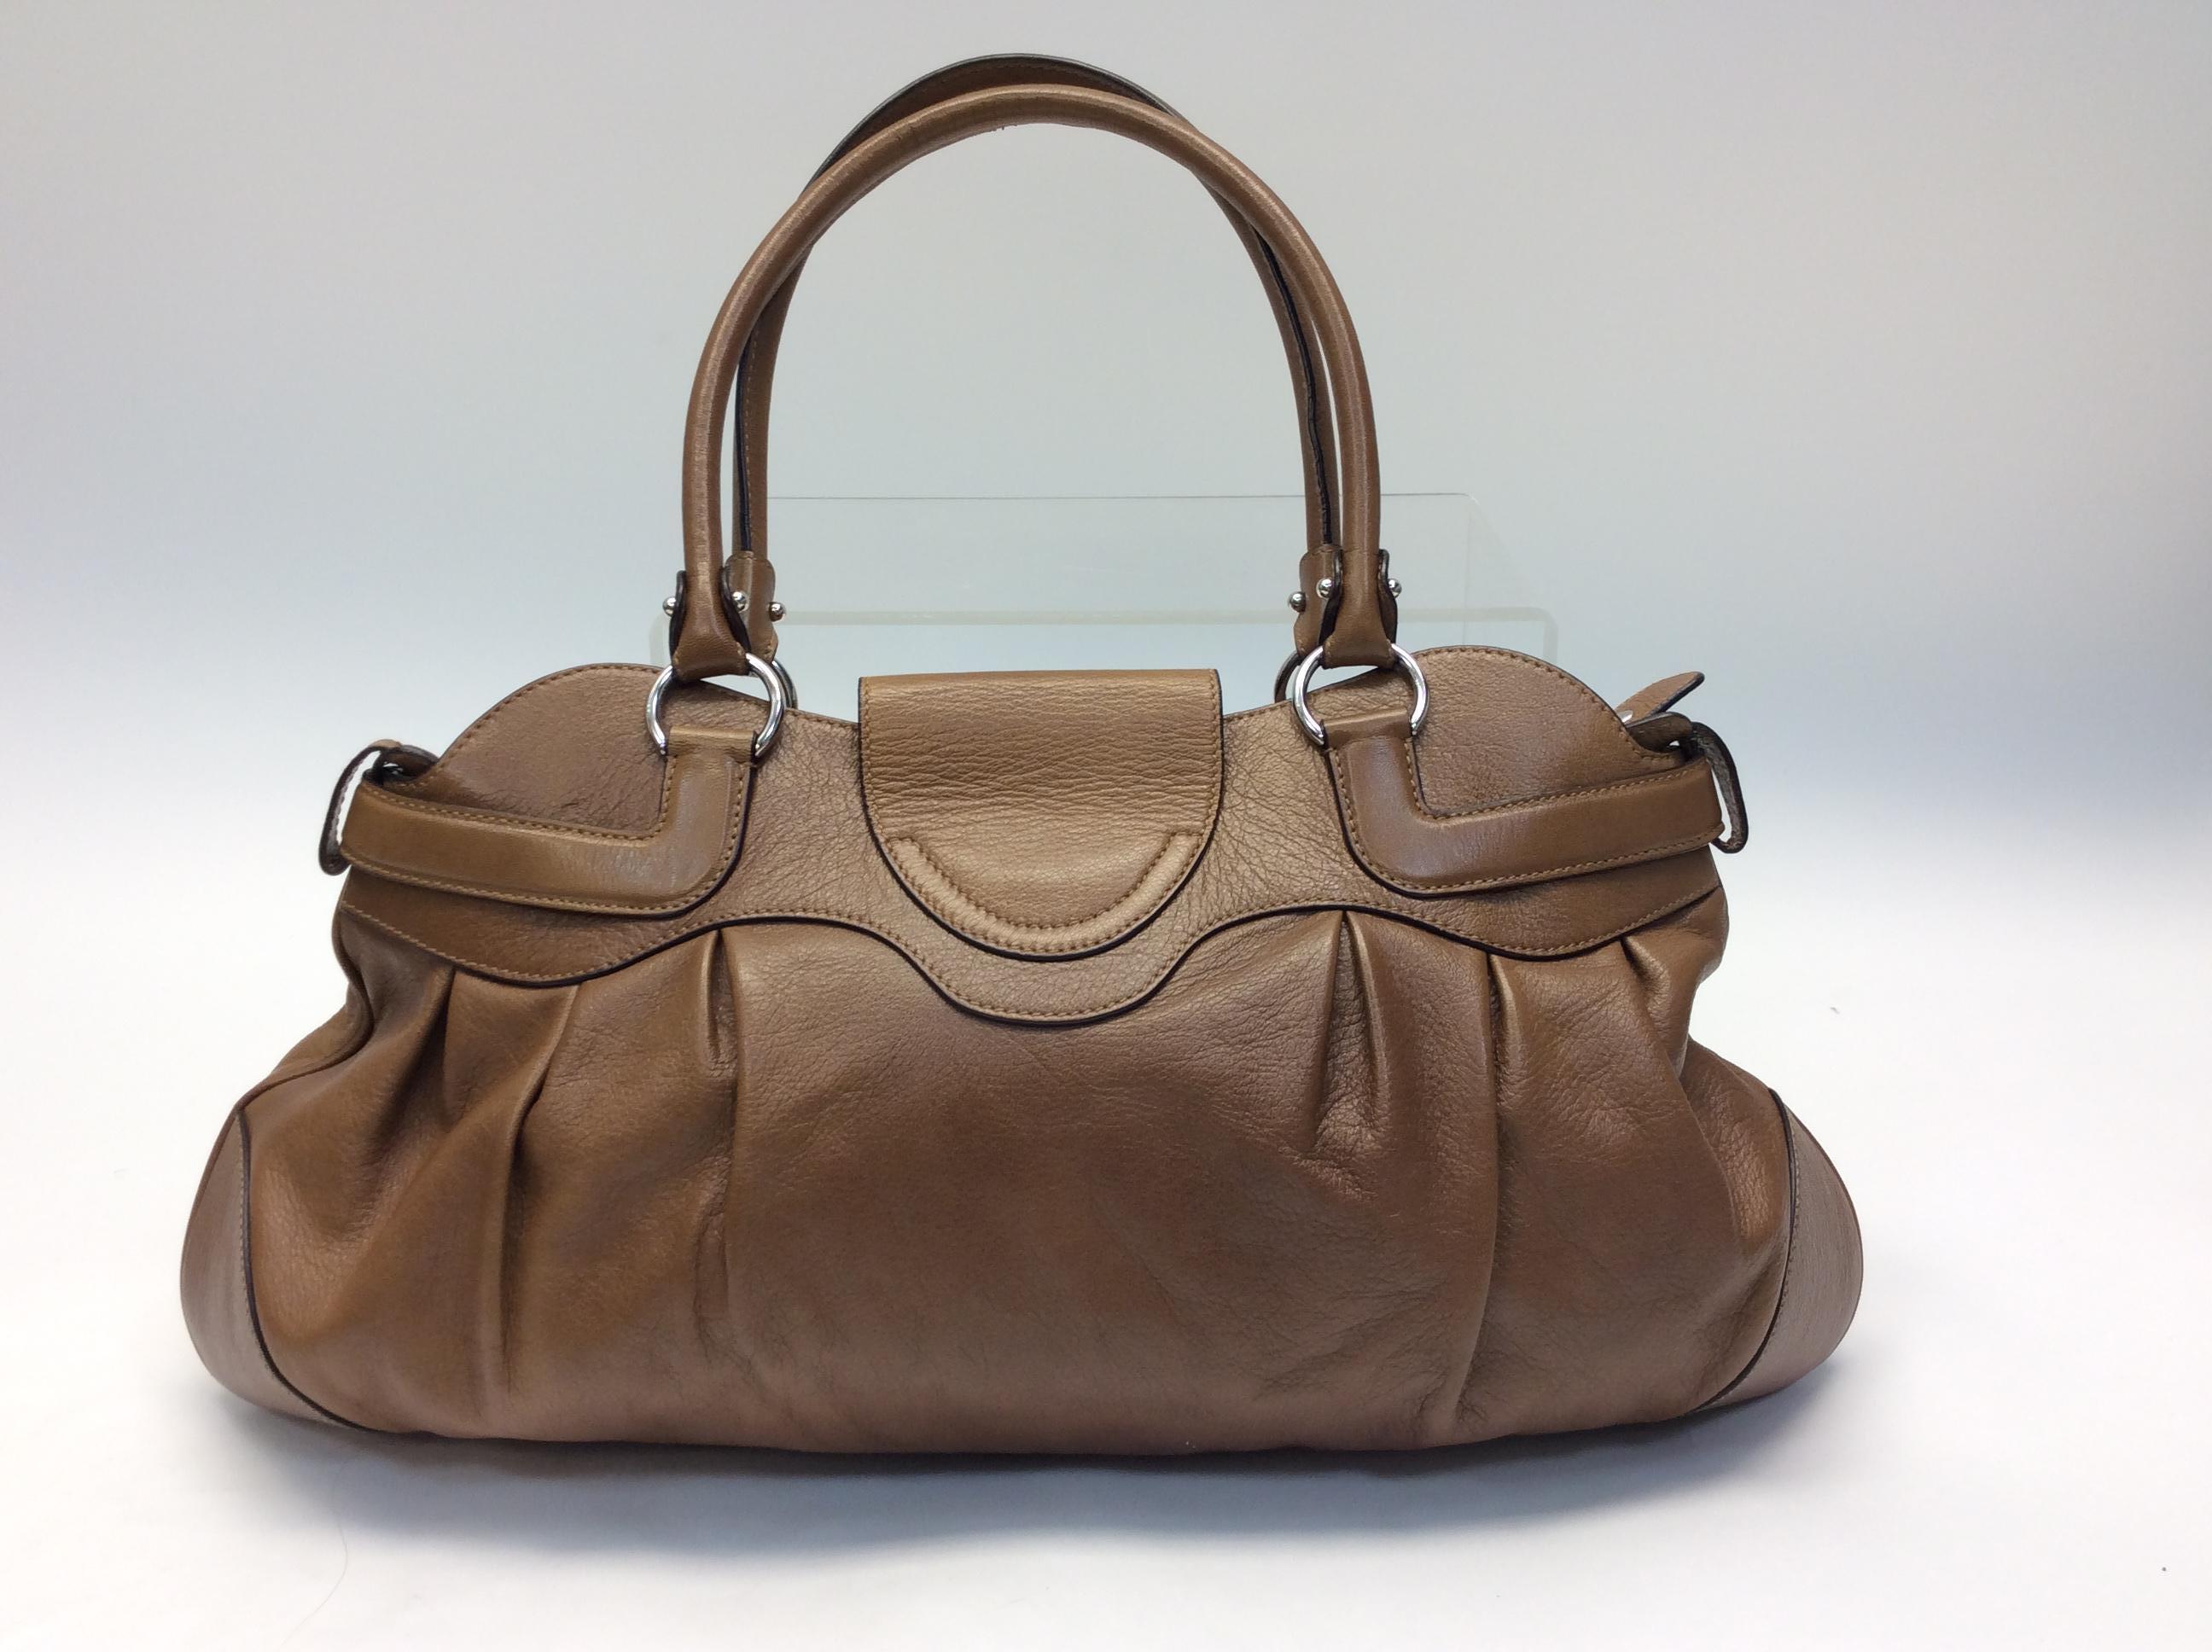 Salvatore Ferragamo Brown Leather Shoulder Bag In Excellent Condition For Sale In Narberth, PA